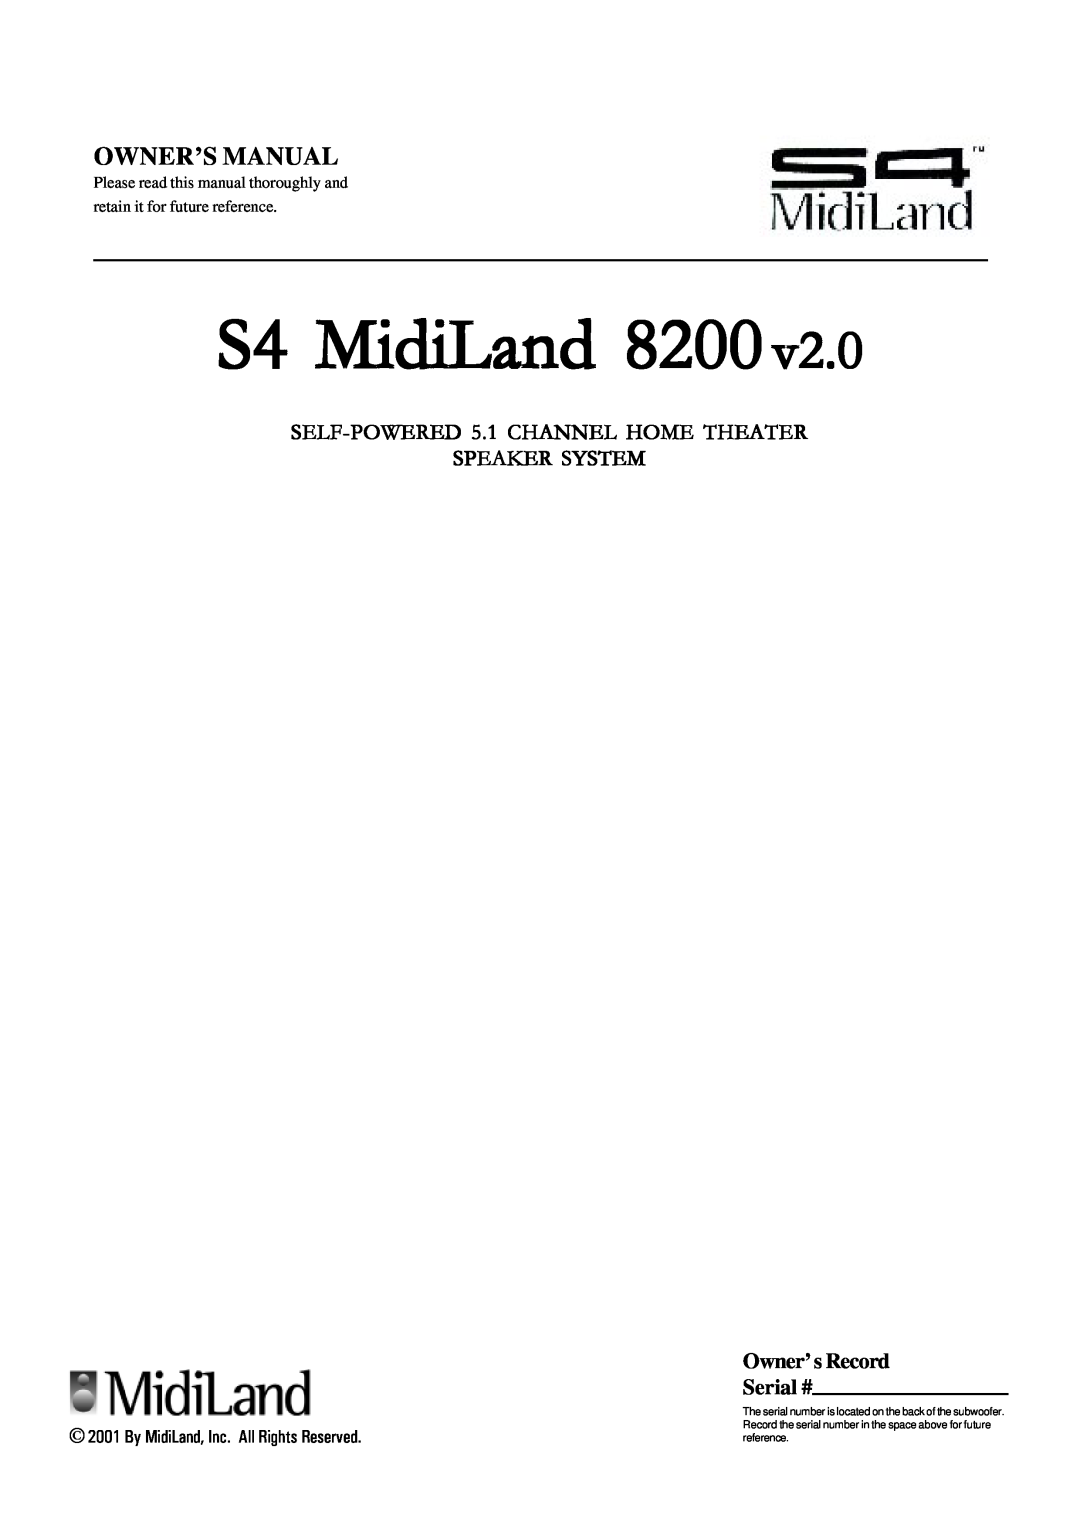 MidiLand 8200 owner manual SELF-POWERED5.1 CHANNEL HOME THEATER, Speaker System, S4 MidiLand, Owner’ s Record Serial # 